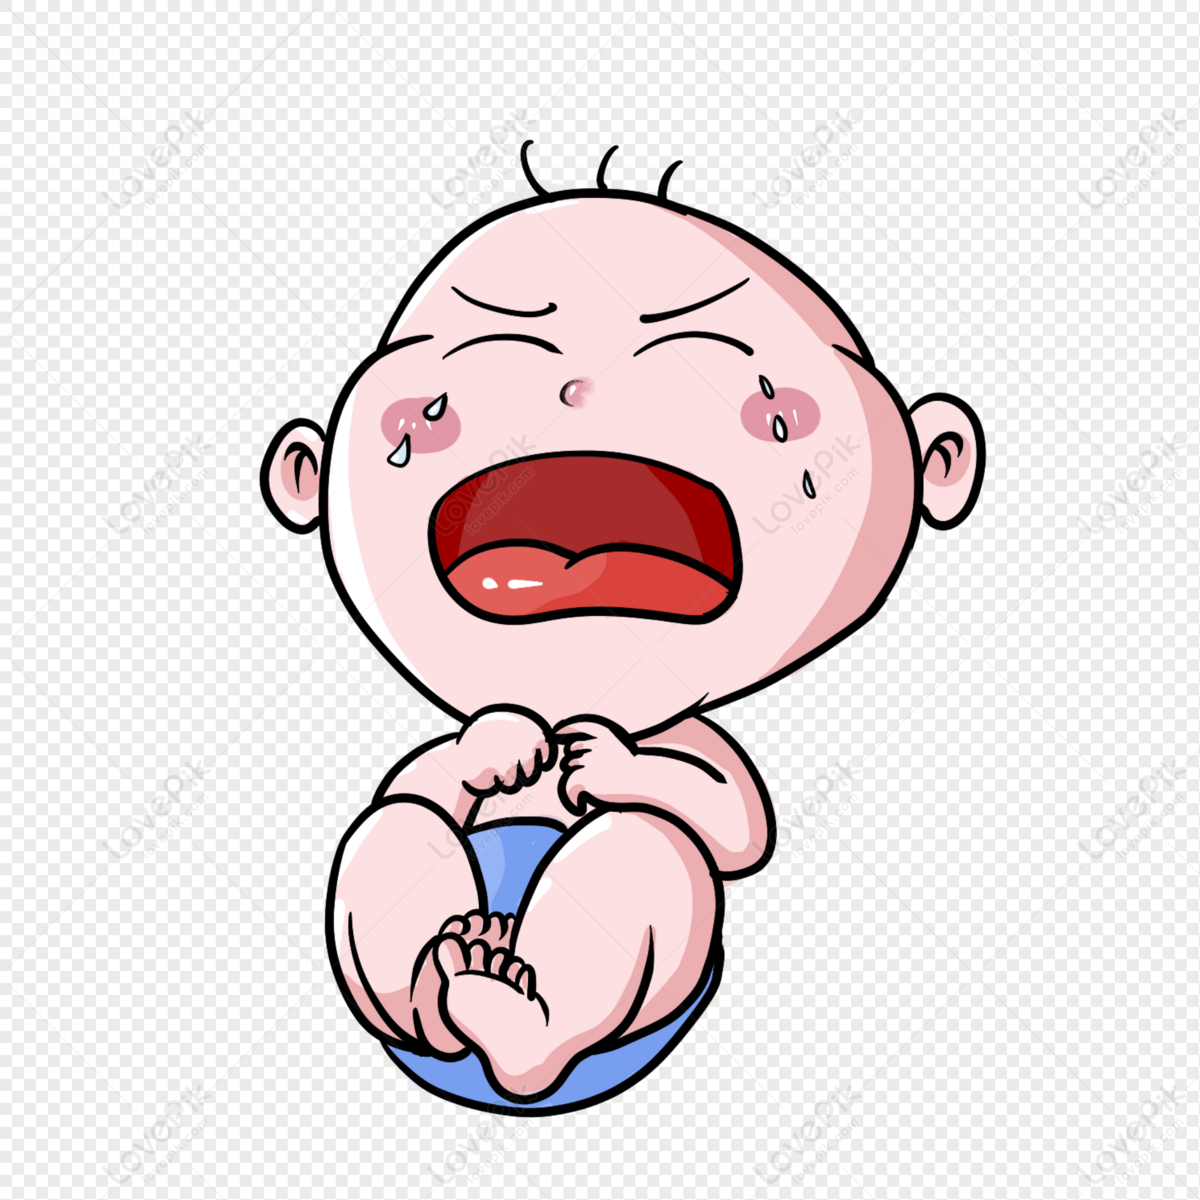 Crying Little Baby PNG Transparent And Clipart Image For Free Download -  Lovepik | 401558396